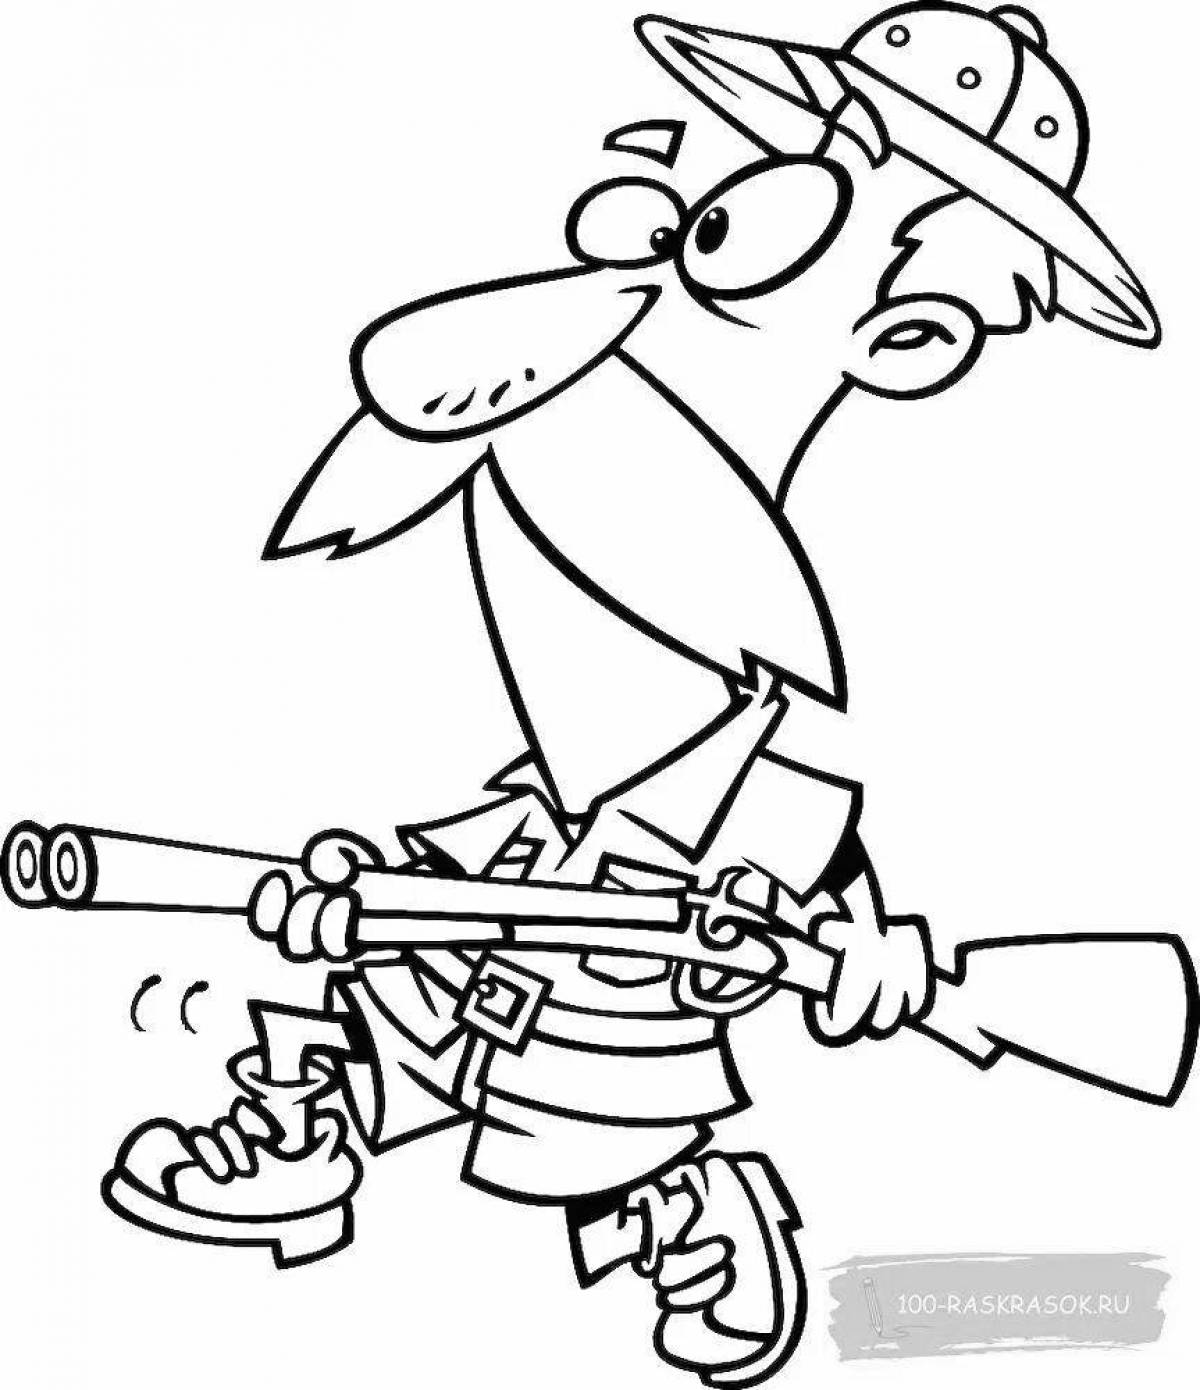 Majestic hunter coloring page